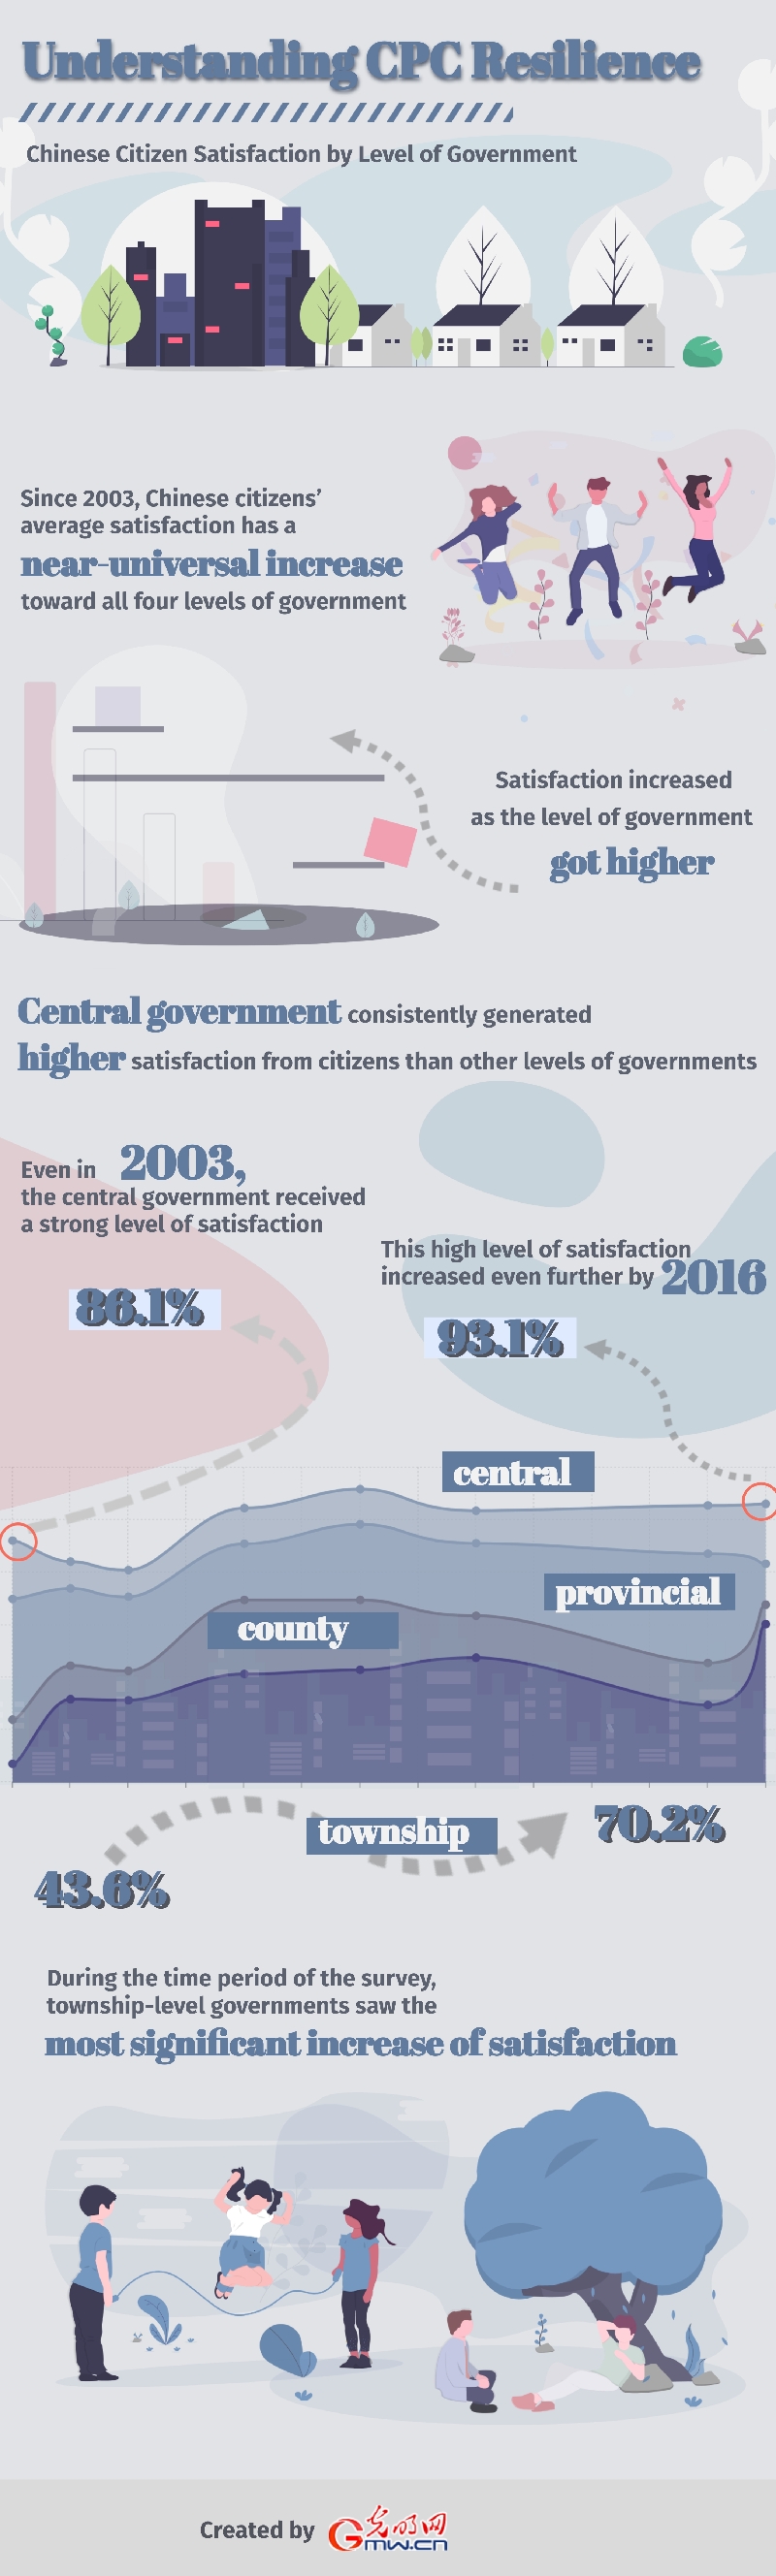 Infographic: Recent trends in Chinese citizens' satisfaction toward all levels of government